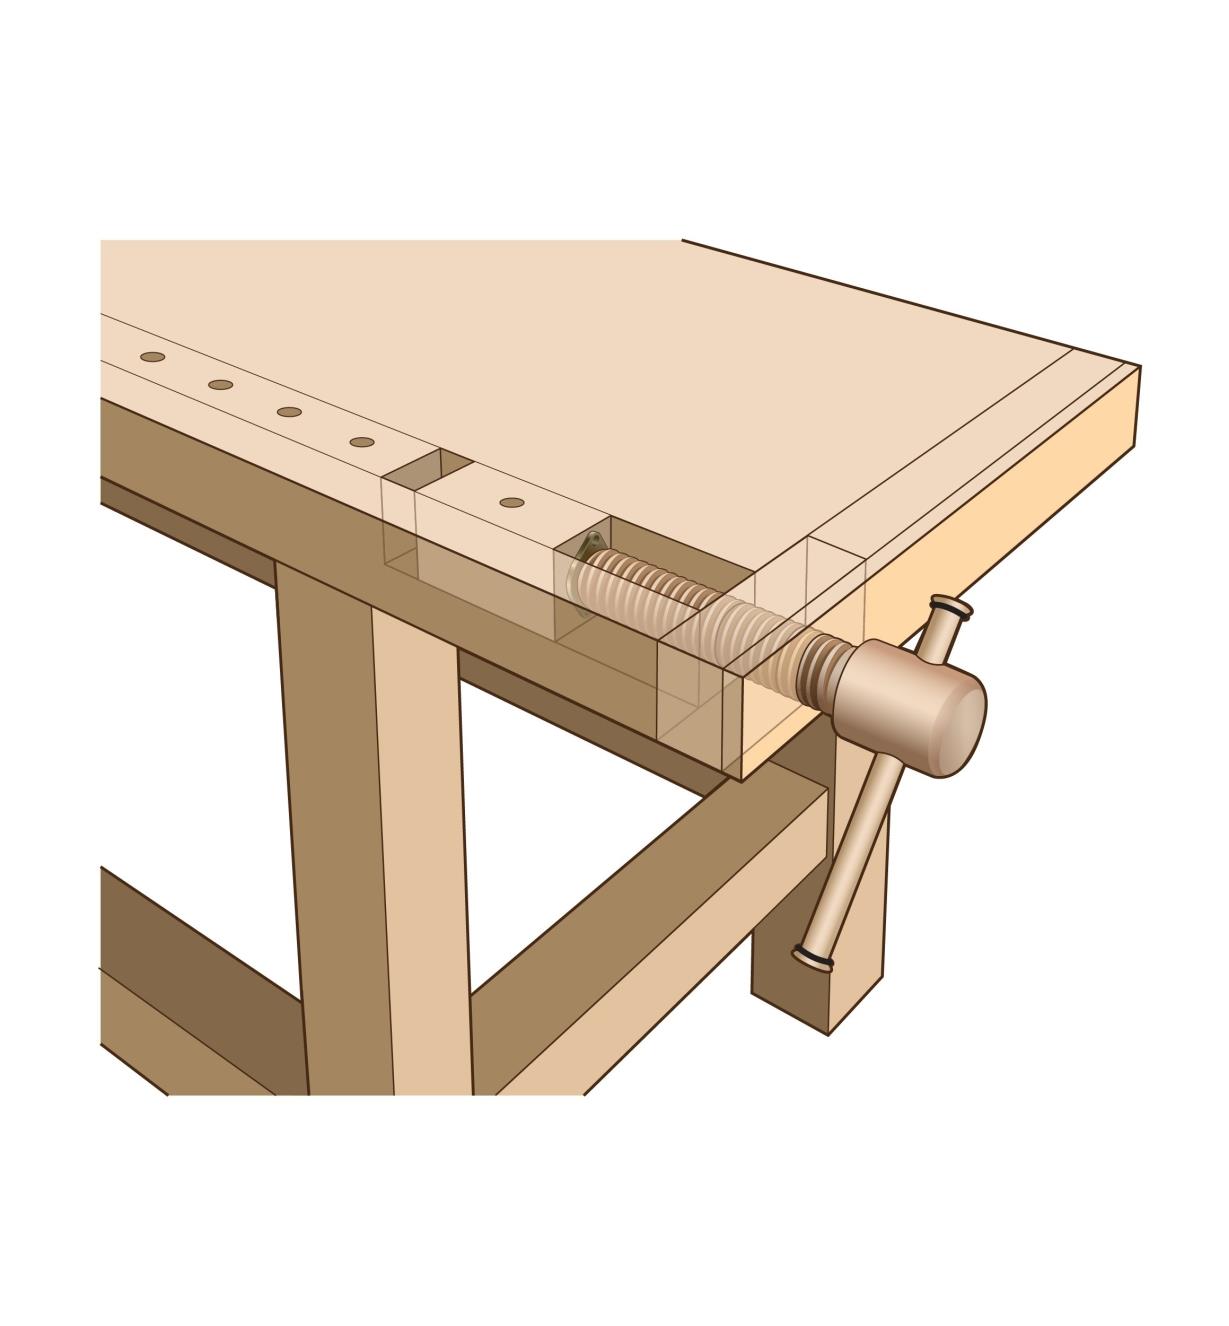 Illustration of Wooden Tail Vise installed in a bench